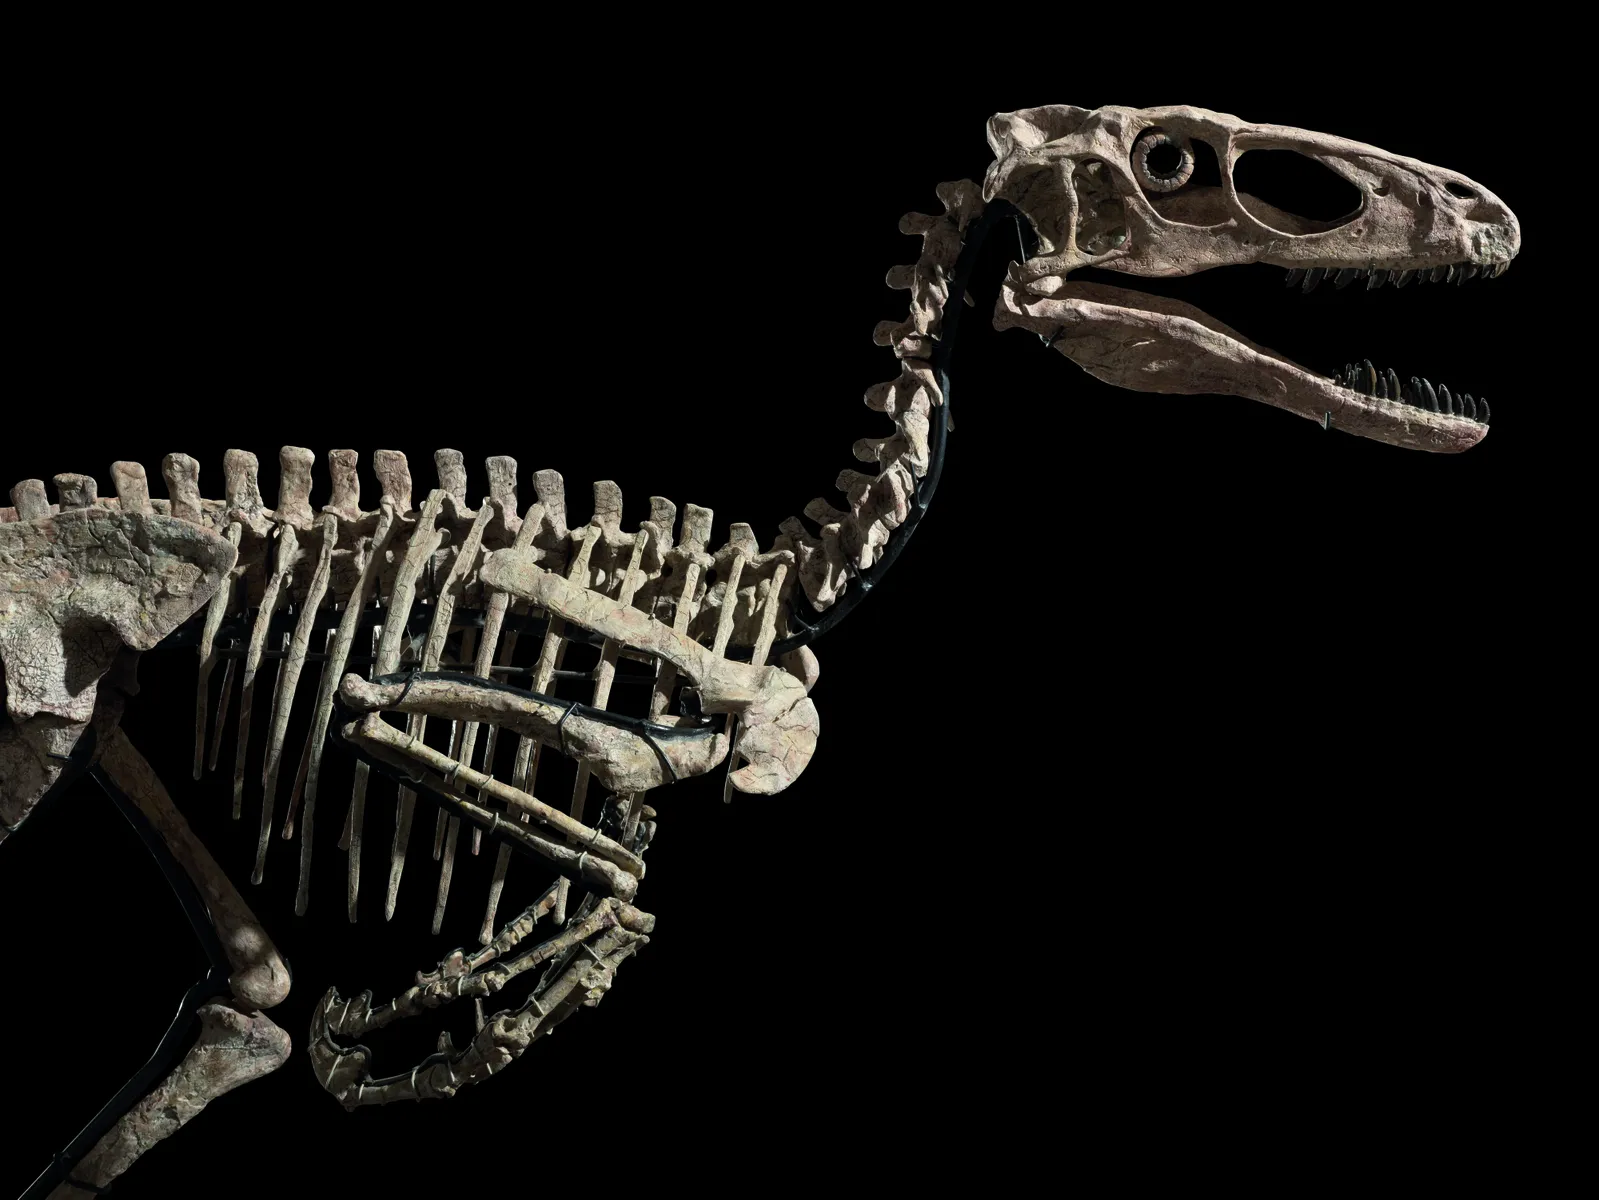 Should the Skeleton of a Dinosaur That Helped Inspire 'Jurassic Park' Be Sold to the Highest Bidder?